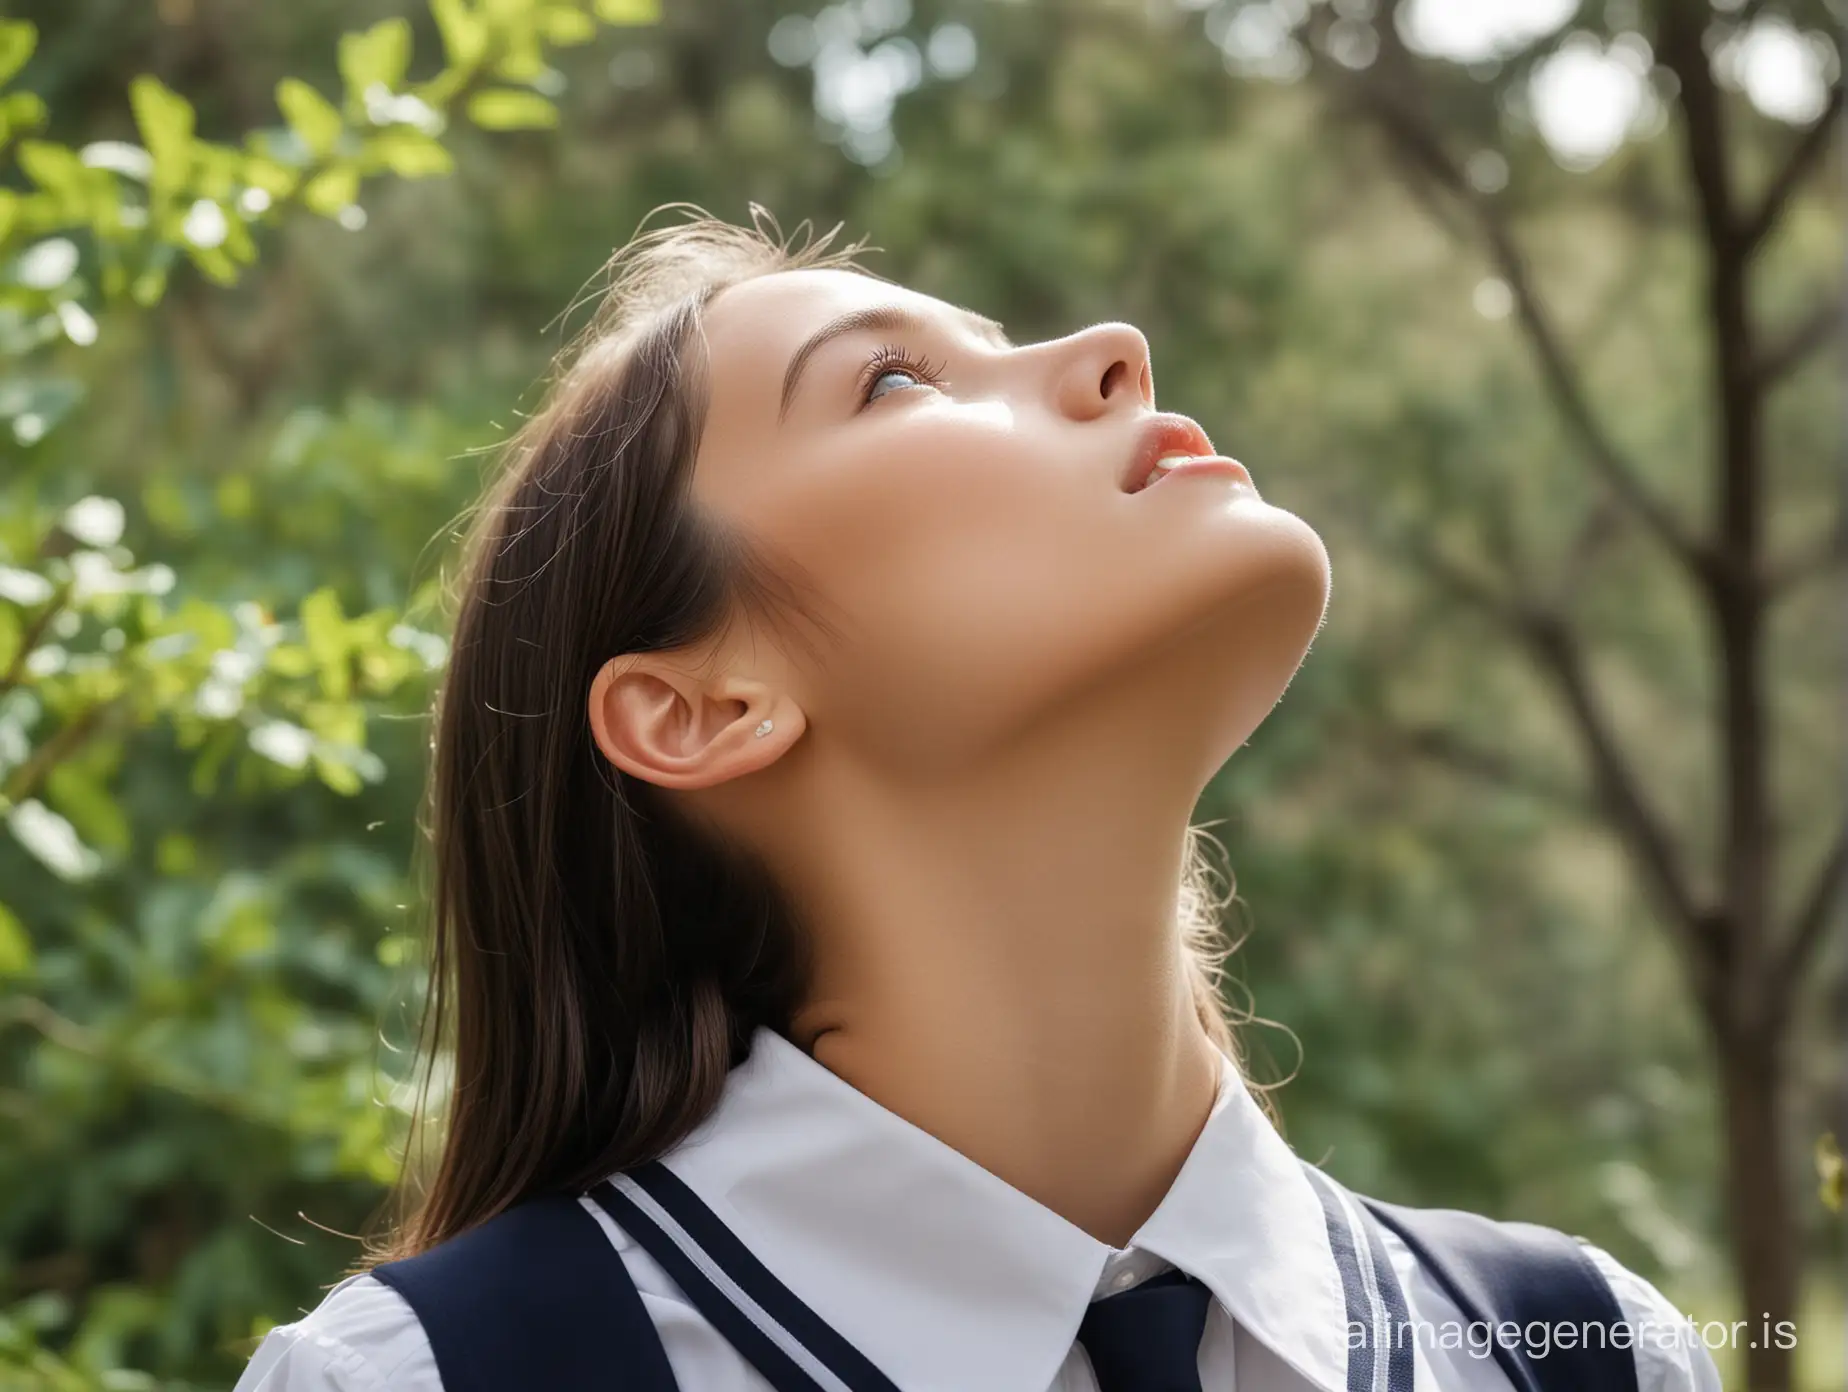 stunningly beautiful girl, looking up to the sky, wearing school uniform, in the garden, slender neck, focus on neck area, (((close up))), Throat